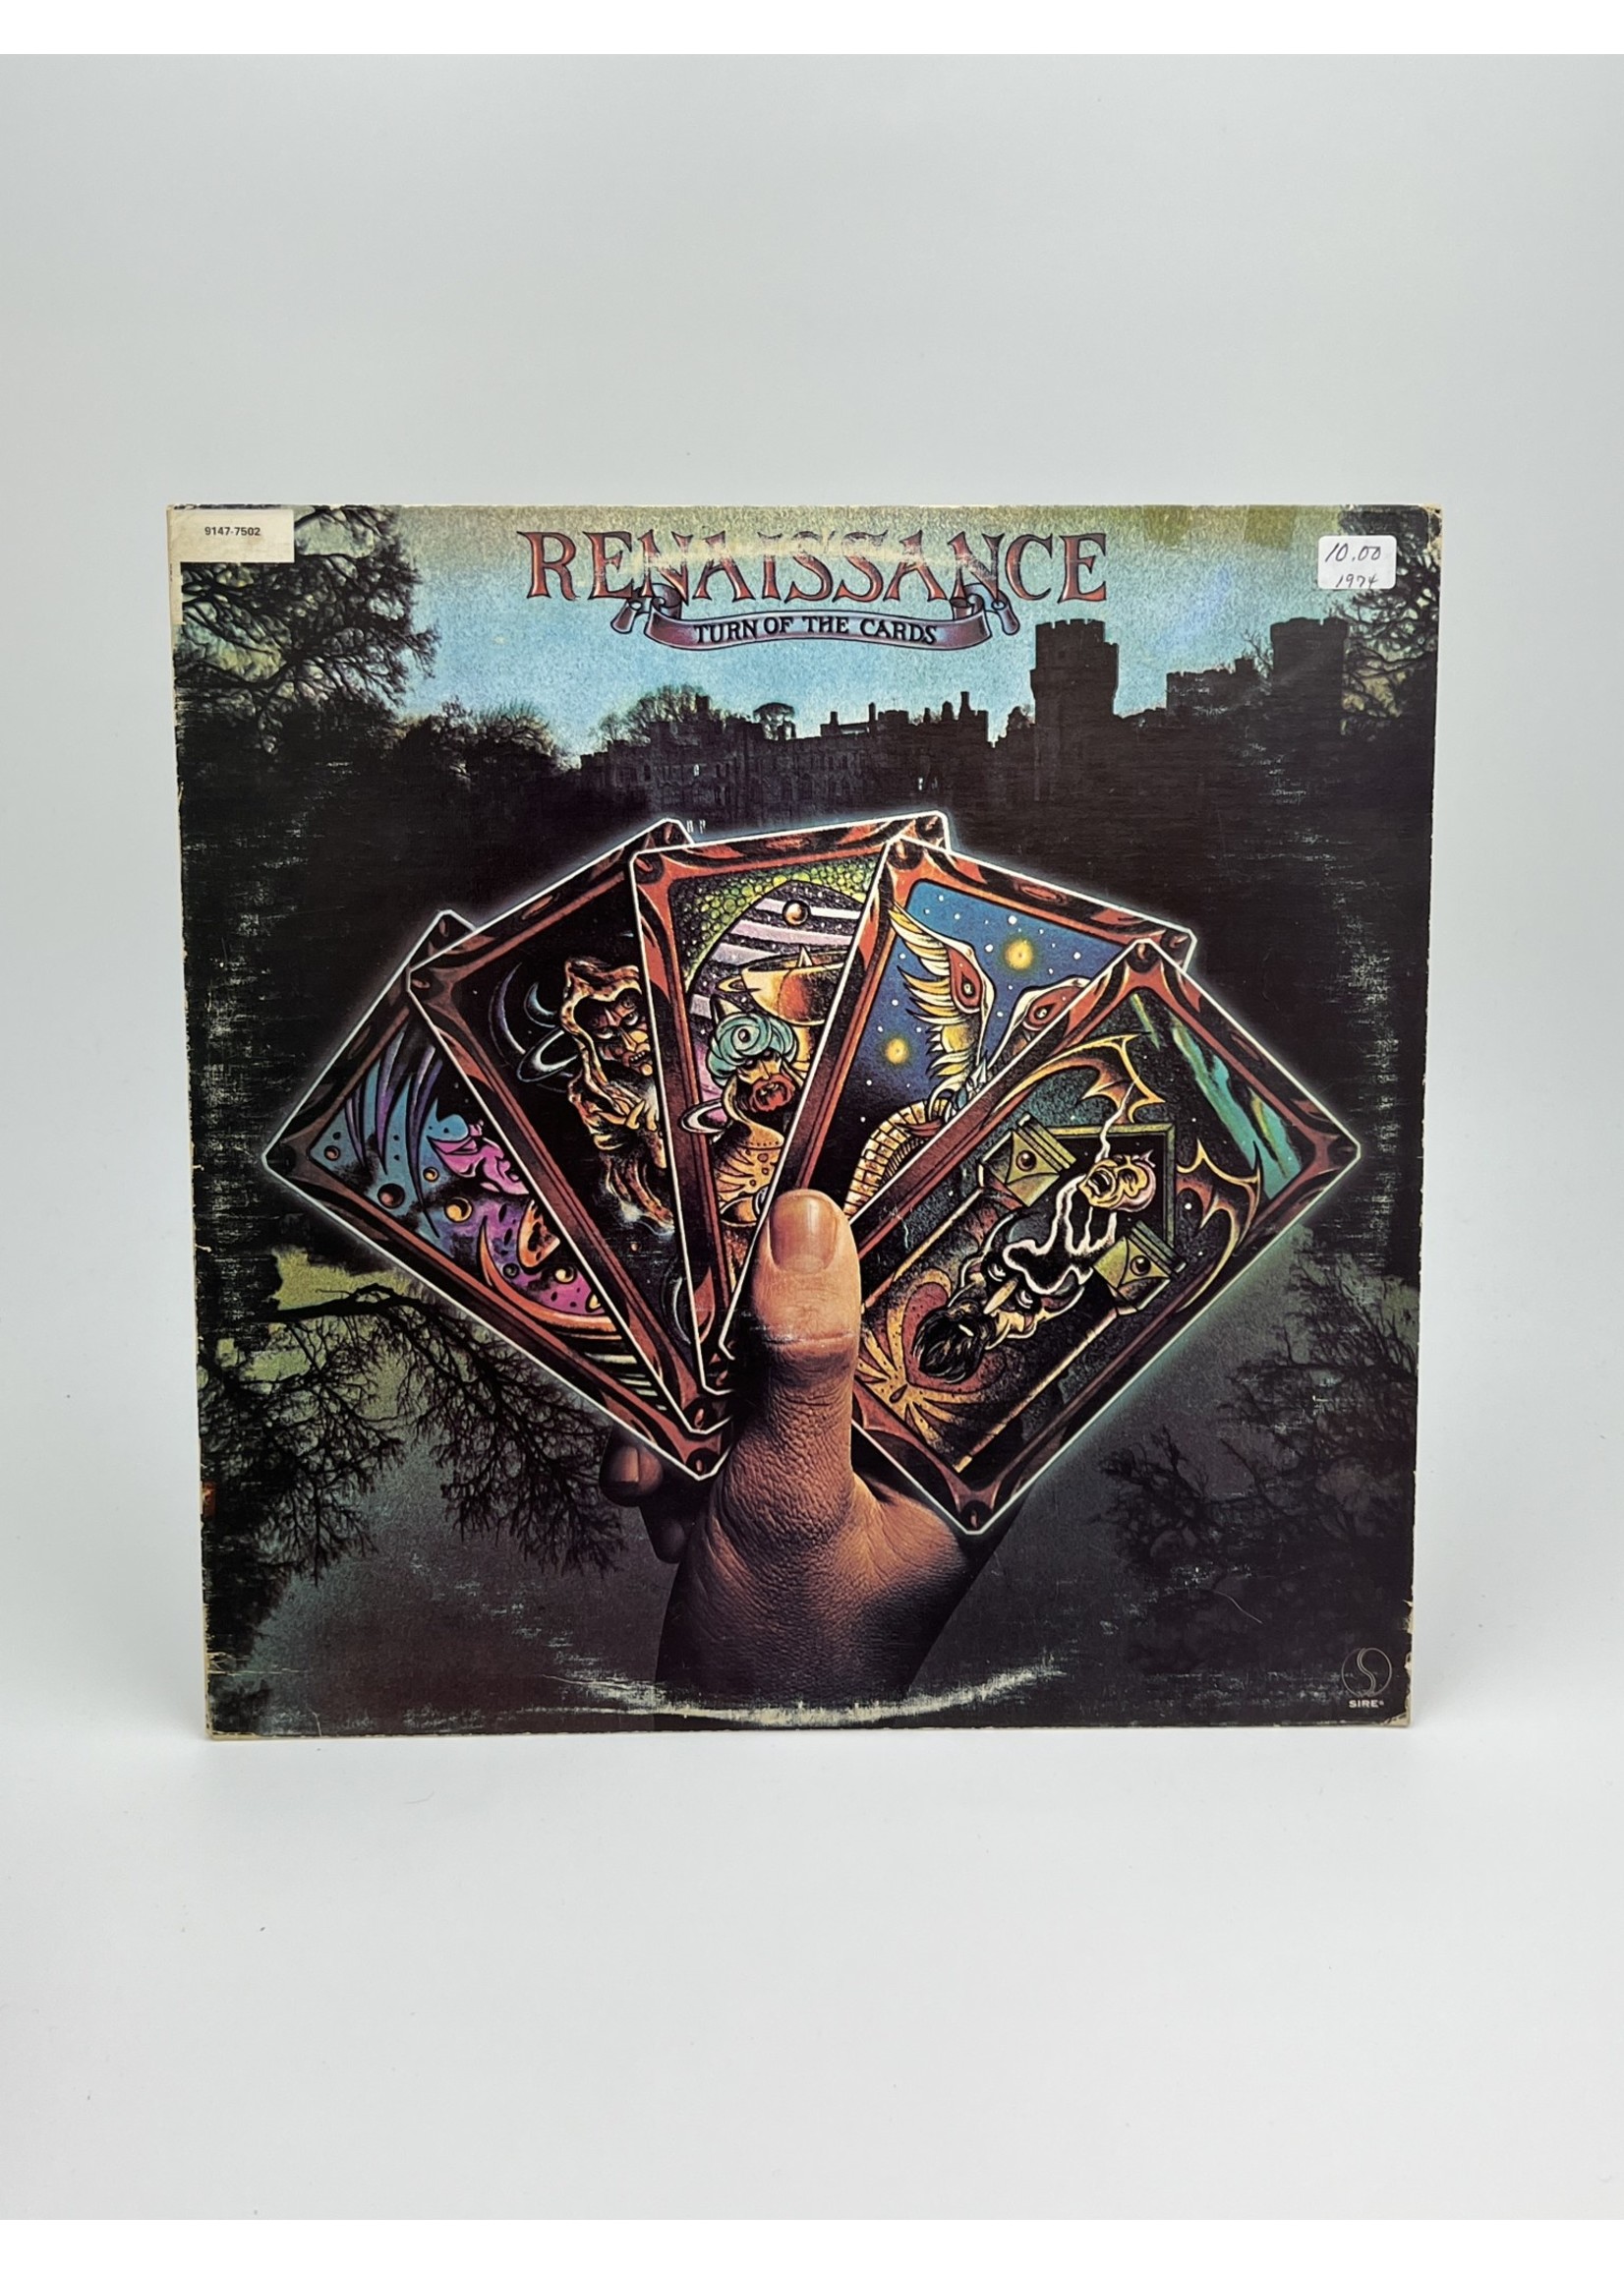 LP Renaissance Turn Of The Cards LP Record